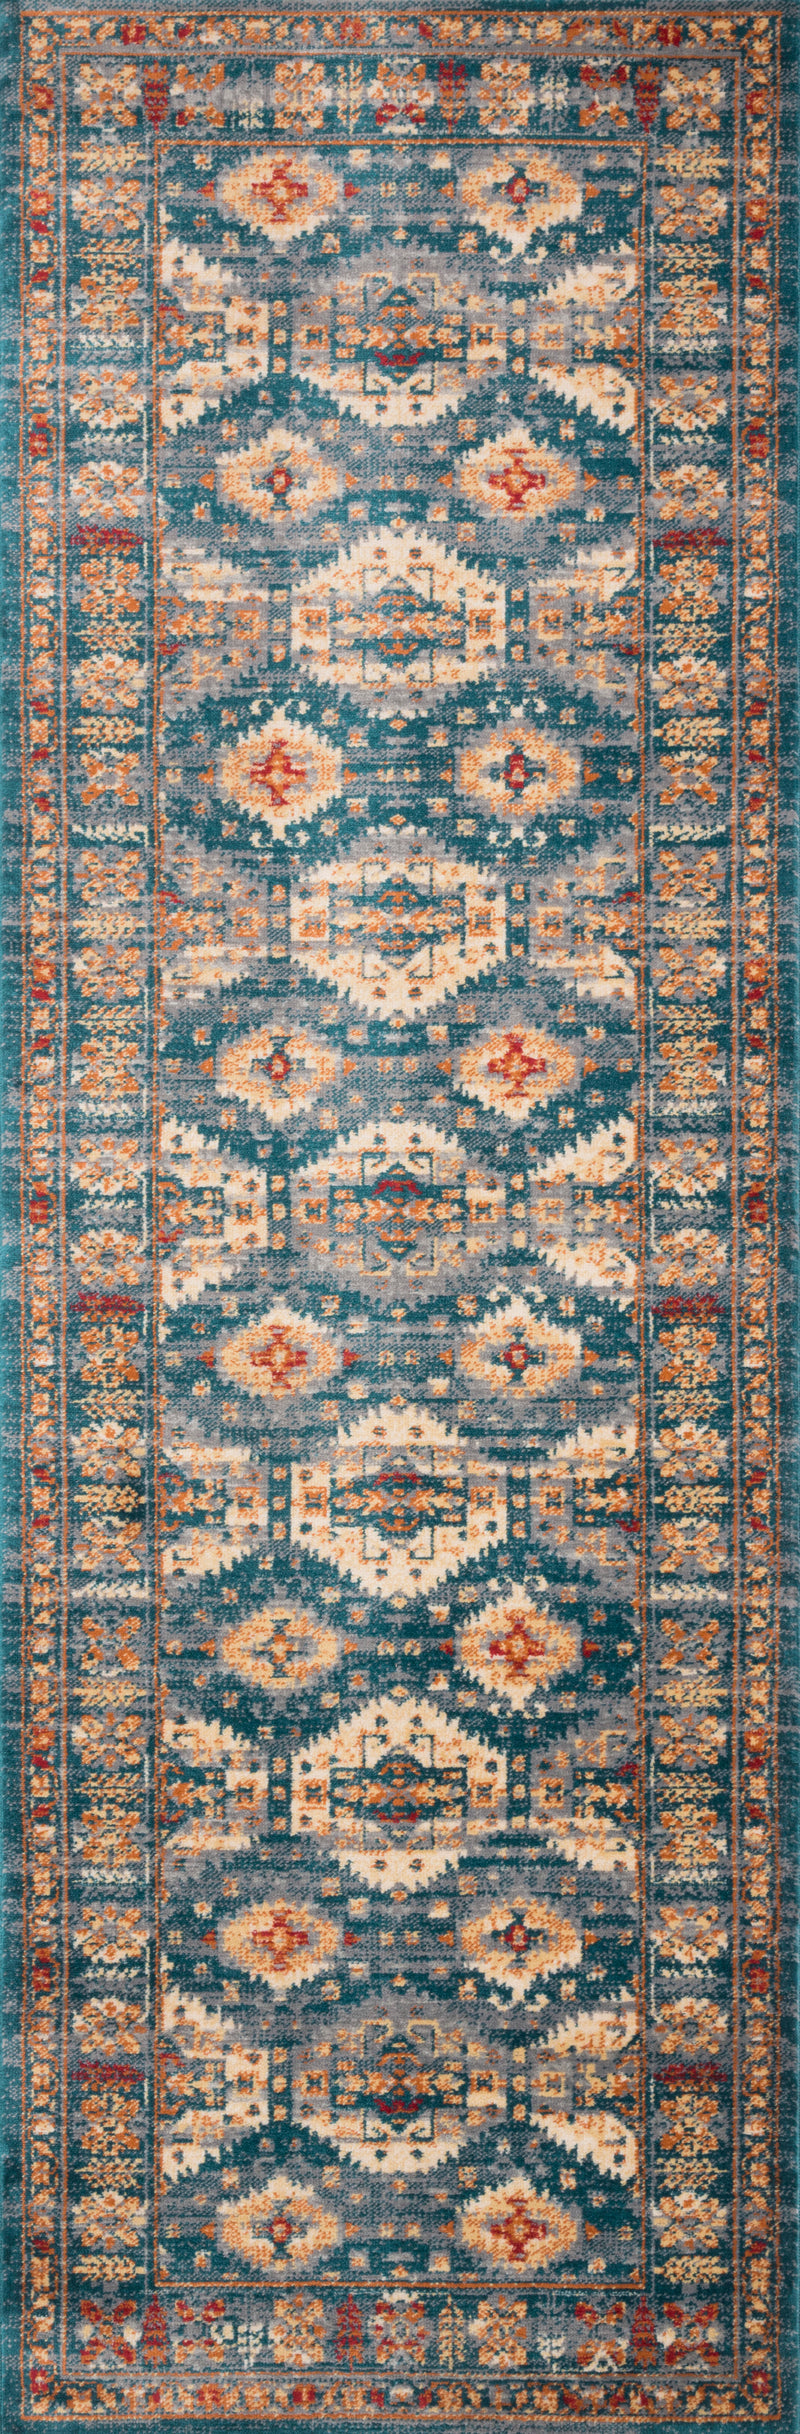 ISADORA Collection Rug  in  LAGOON / MULTI Blue Accent Power-Loomed Polypropylene